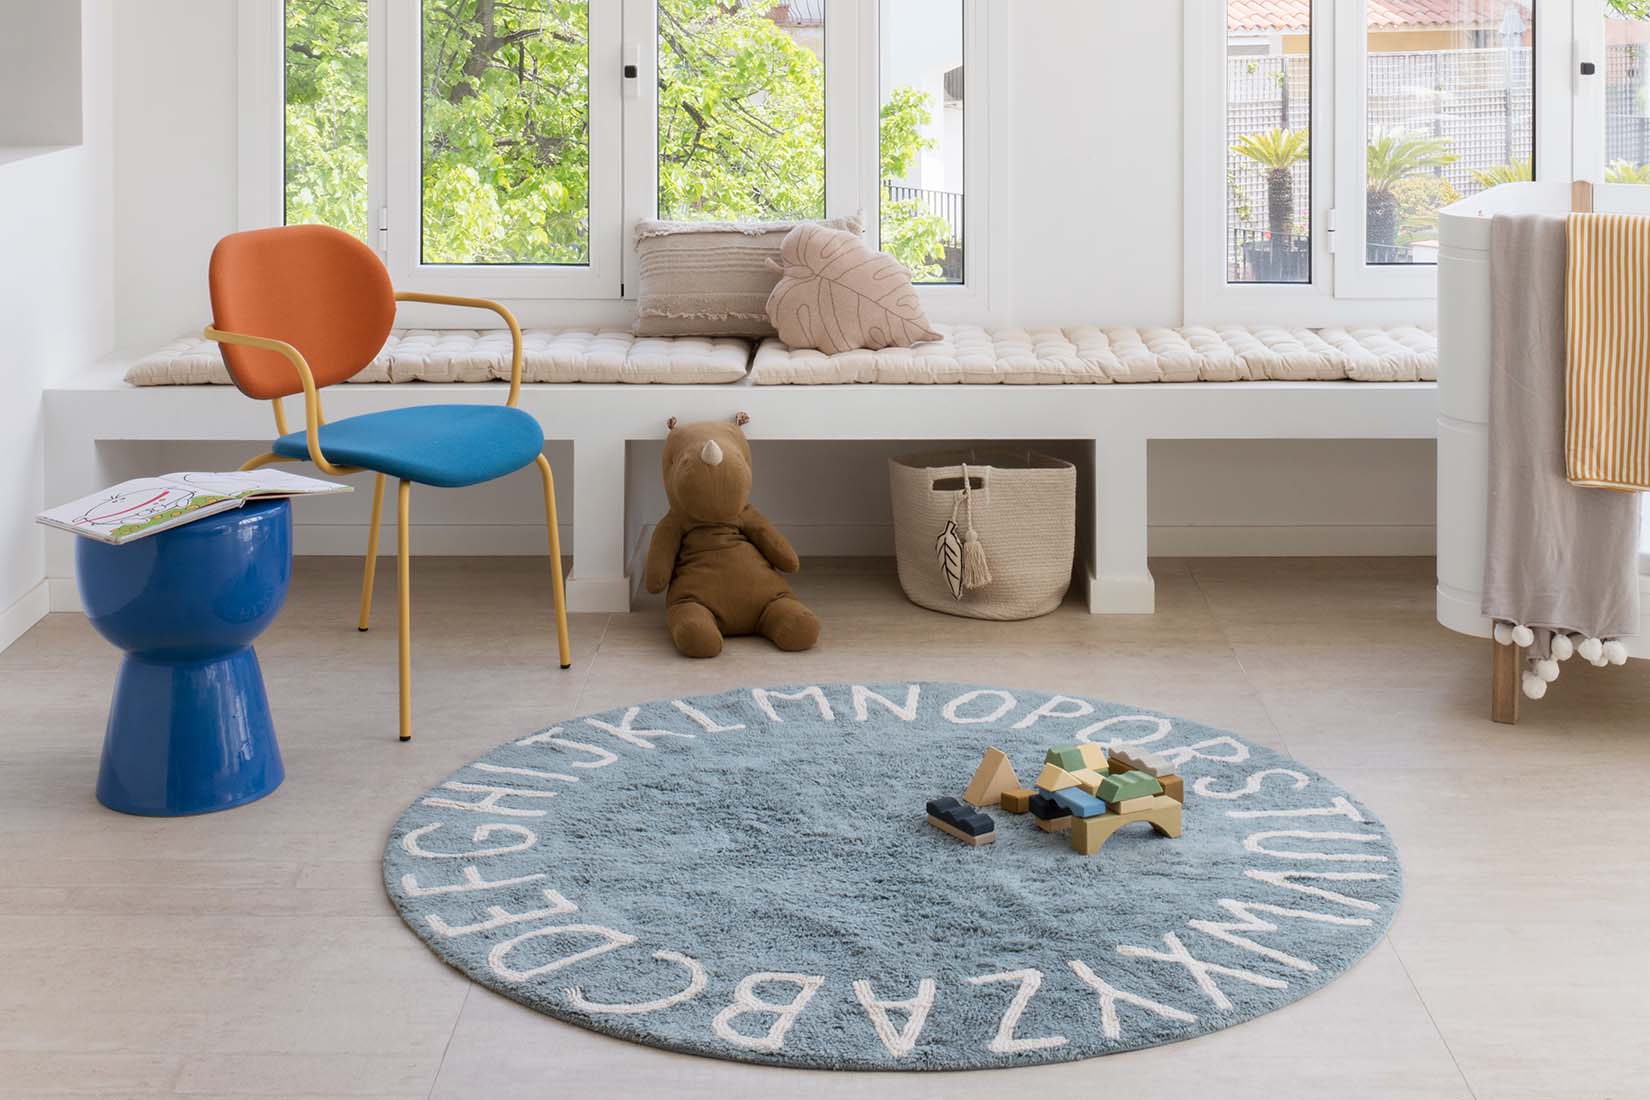 Circular blue cotton rug decorated with a natural beige alphabet border